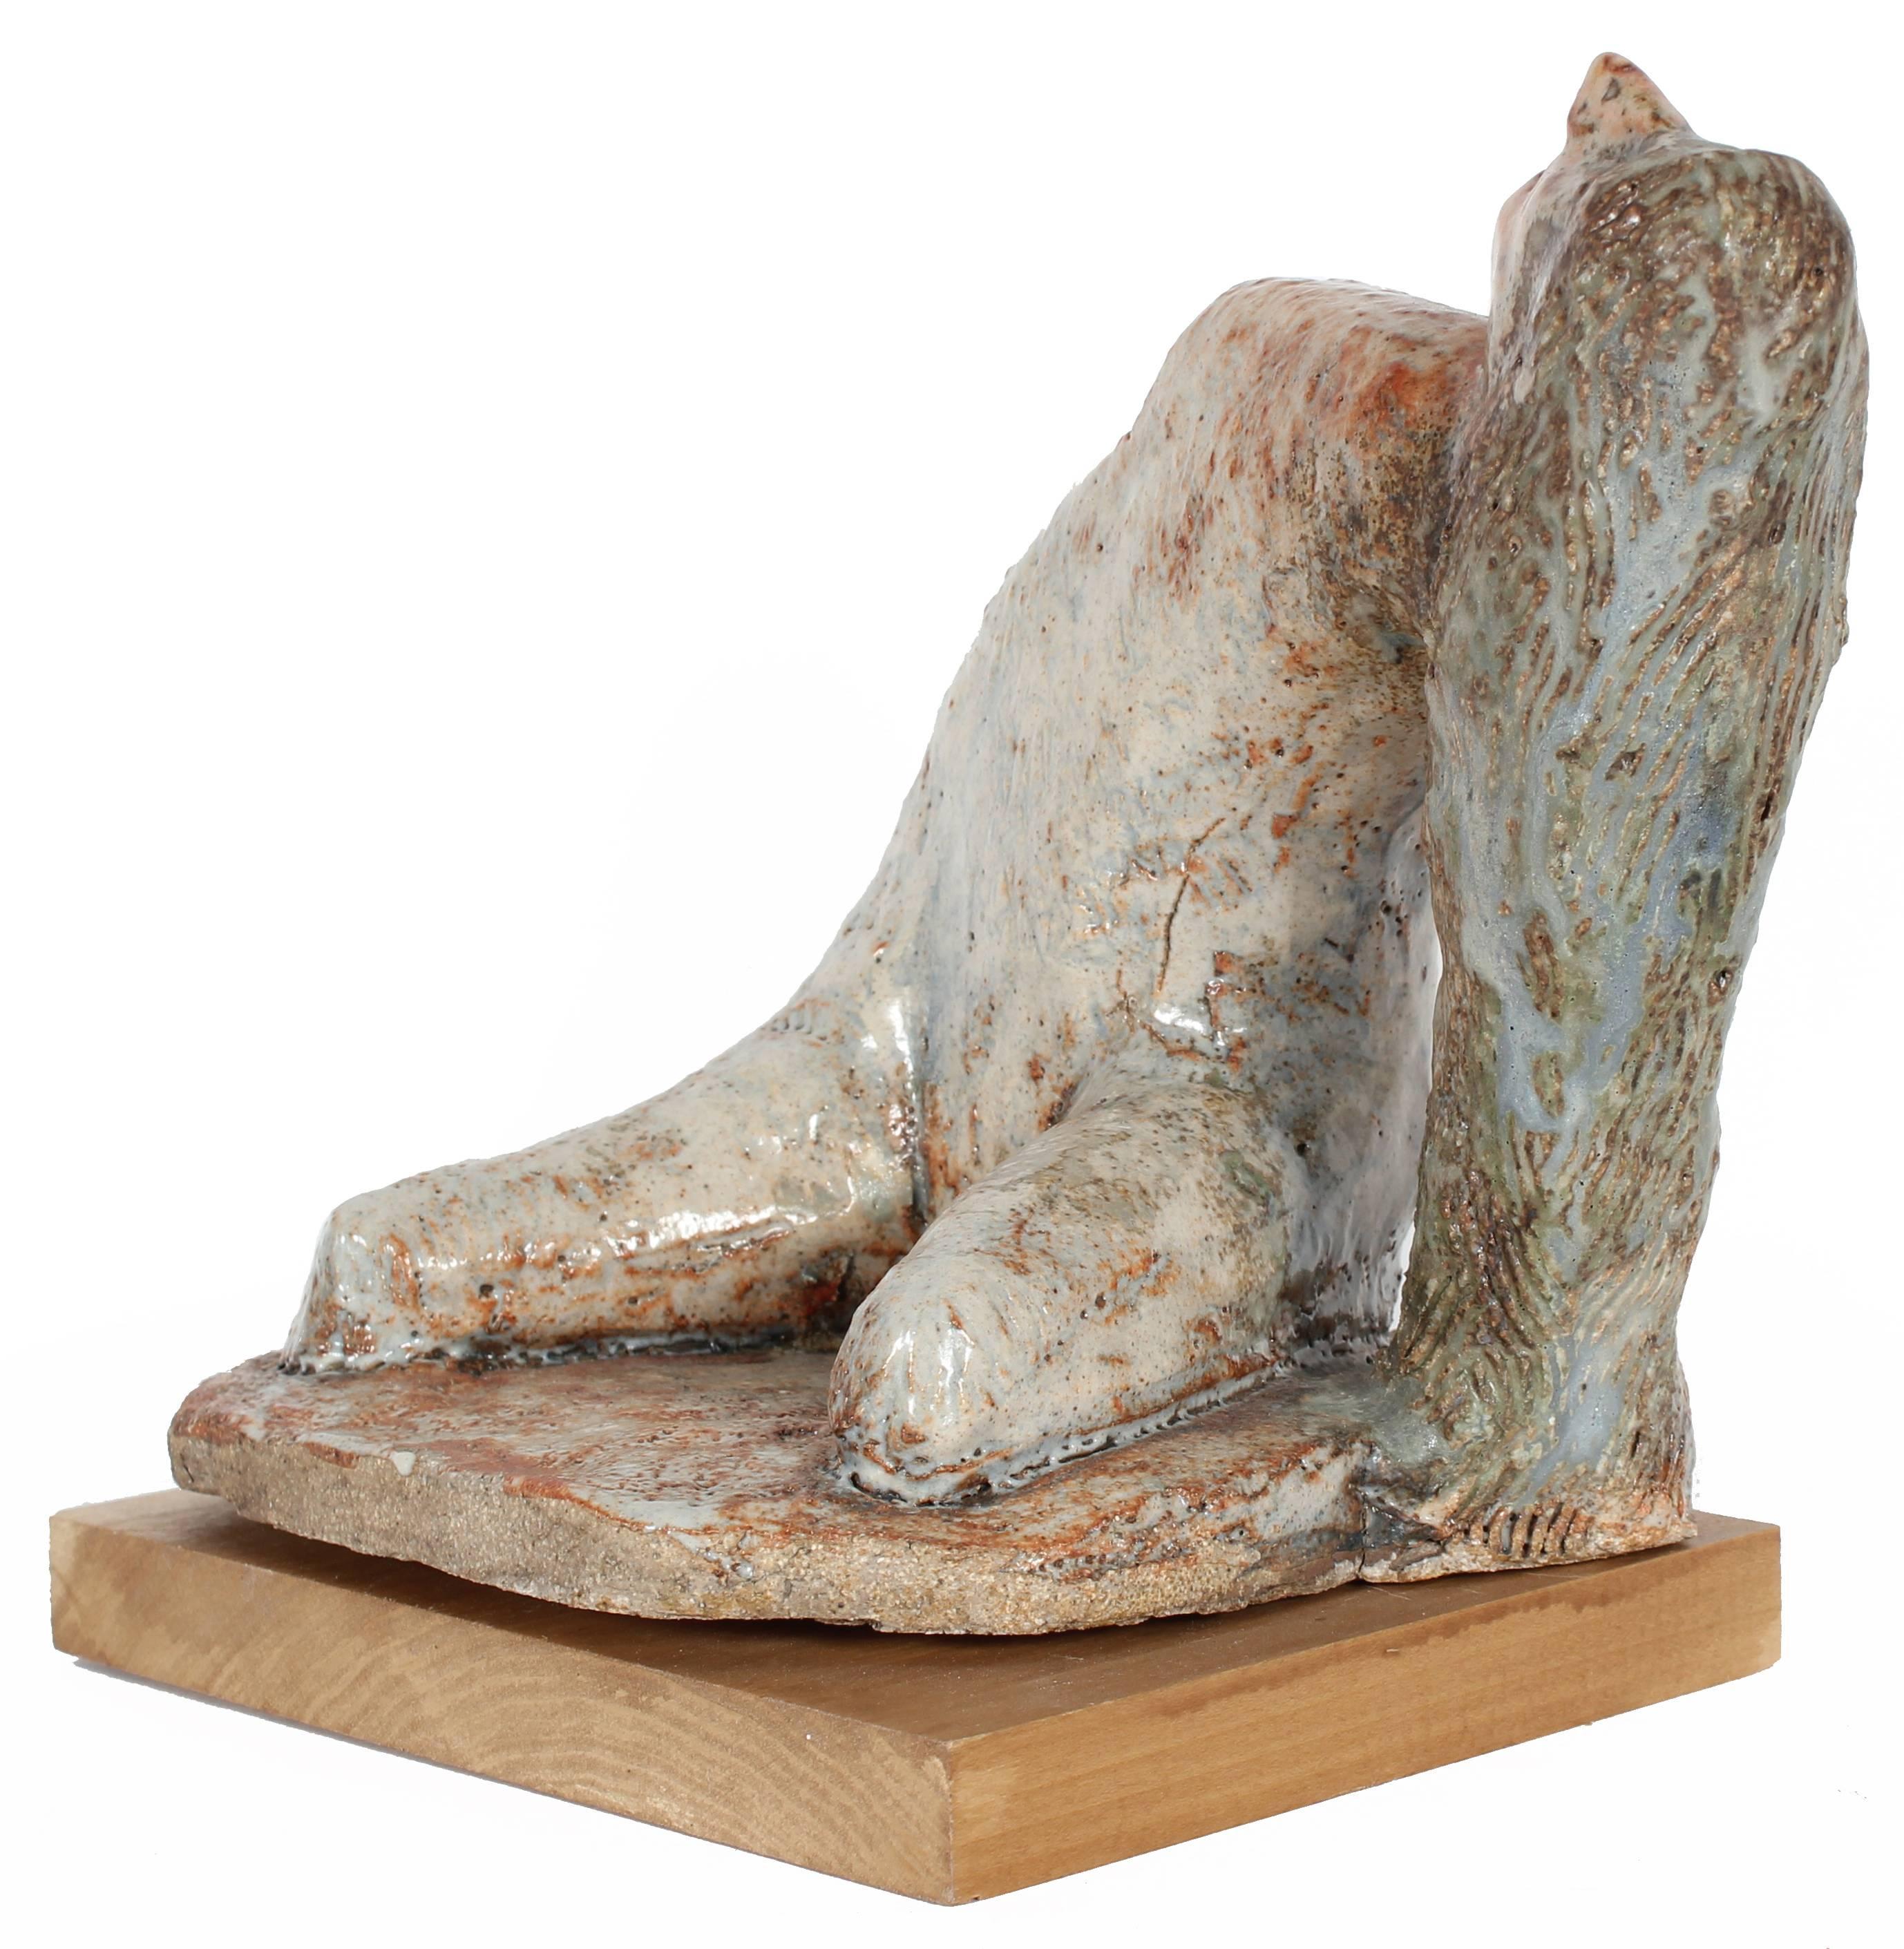 Arched Female Form Glazed Ceramic Sculpture, 2006 - Brown Nude Sculpture by Dave Fox